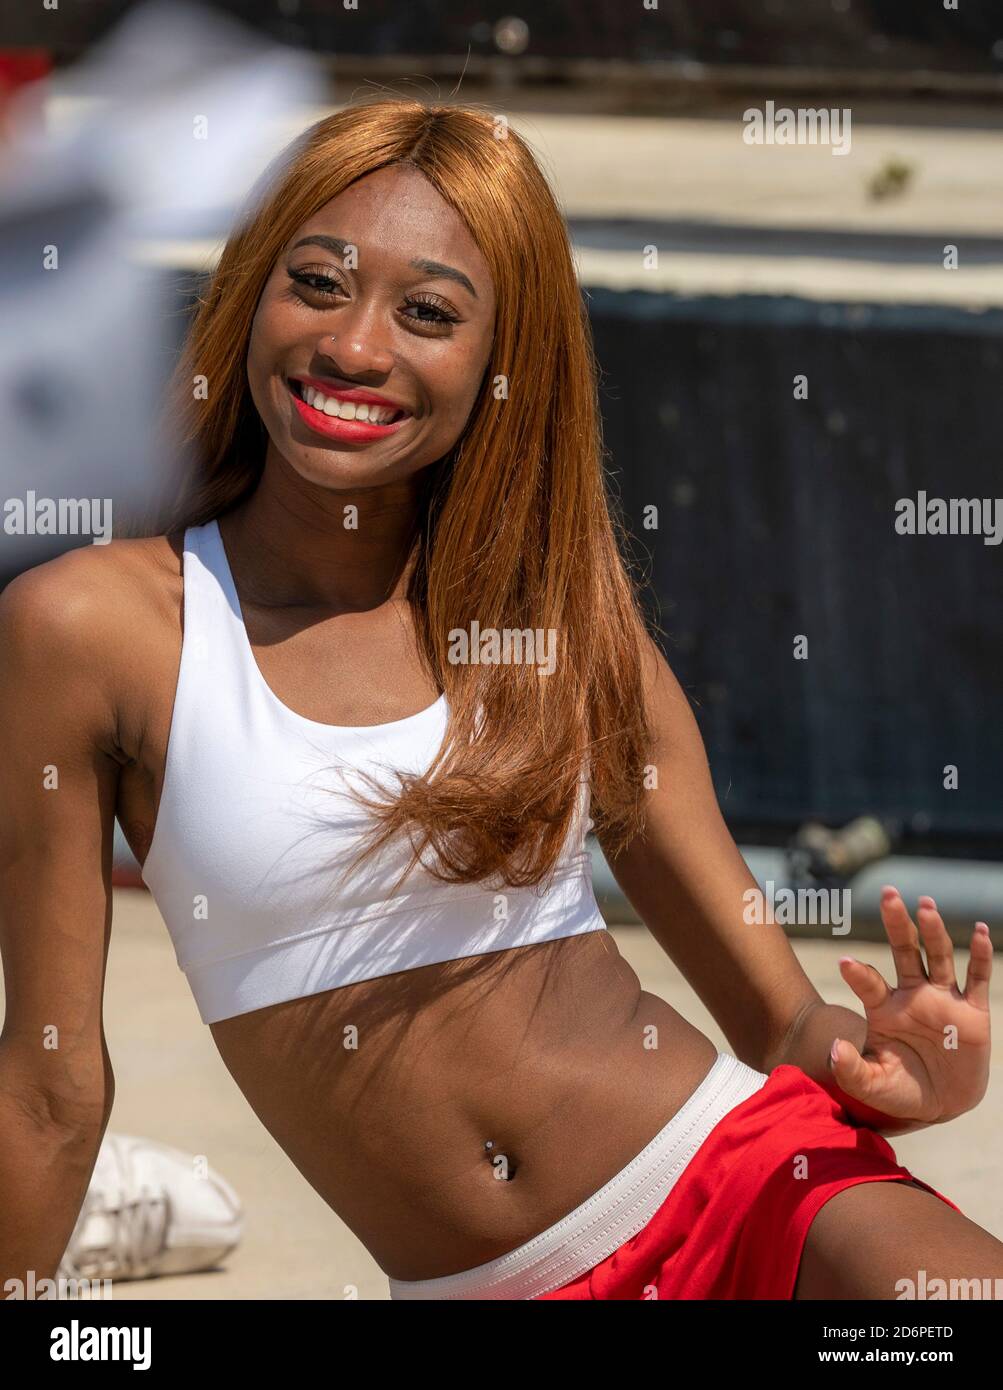 COLLEGE PARK, MD - AUGUST 31: Howard cheerleader during a football game between the University of Maryland and Howard University on August 31, 2019, a Stock Photo